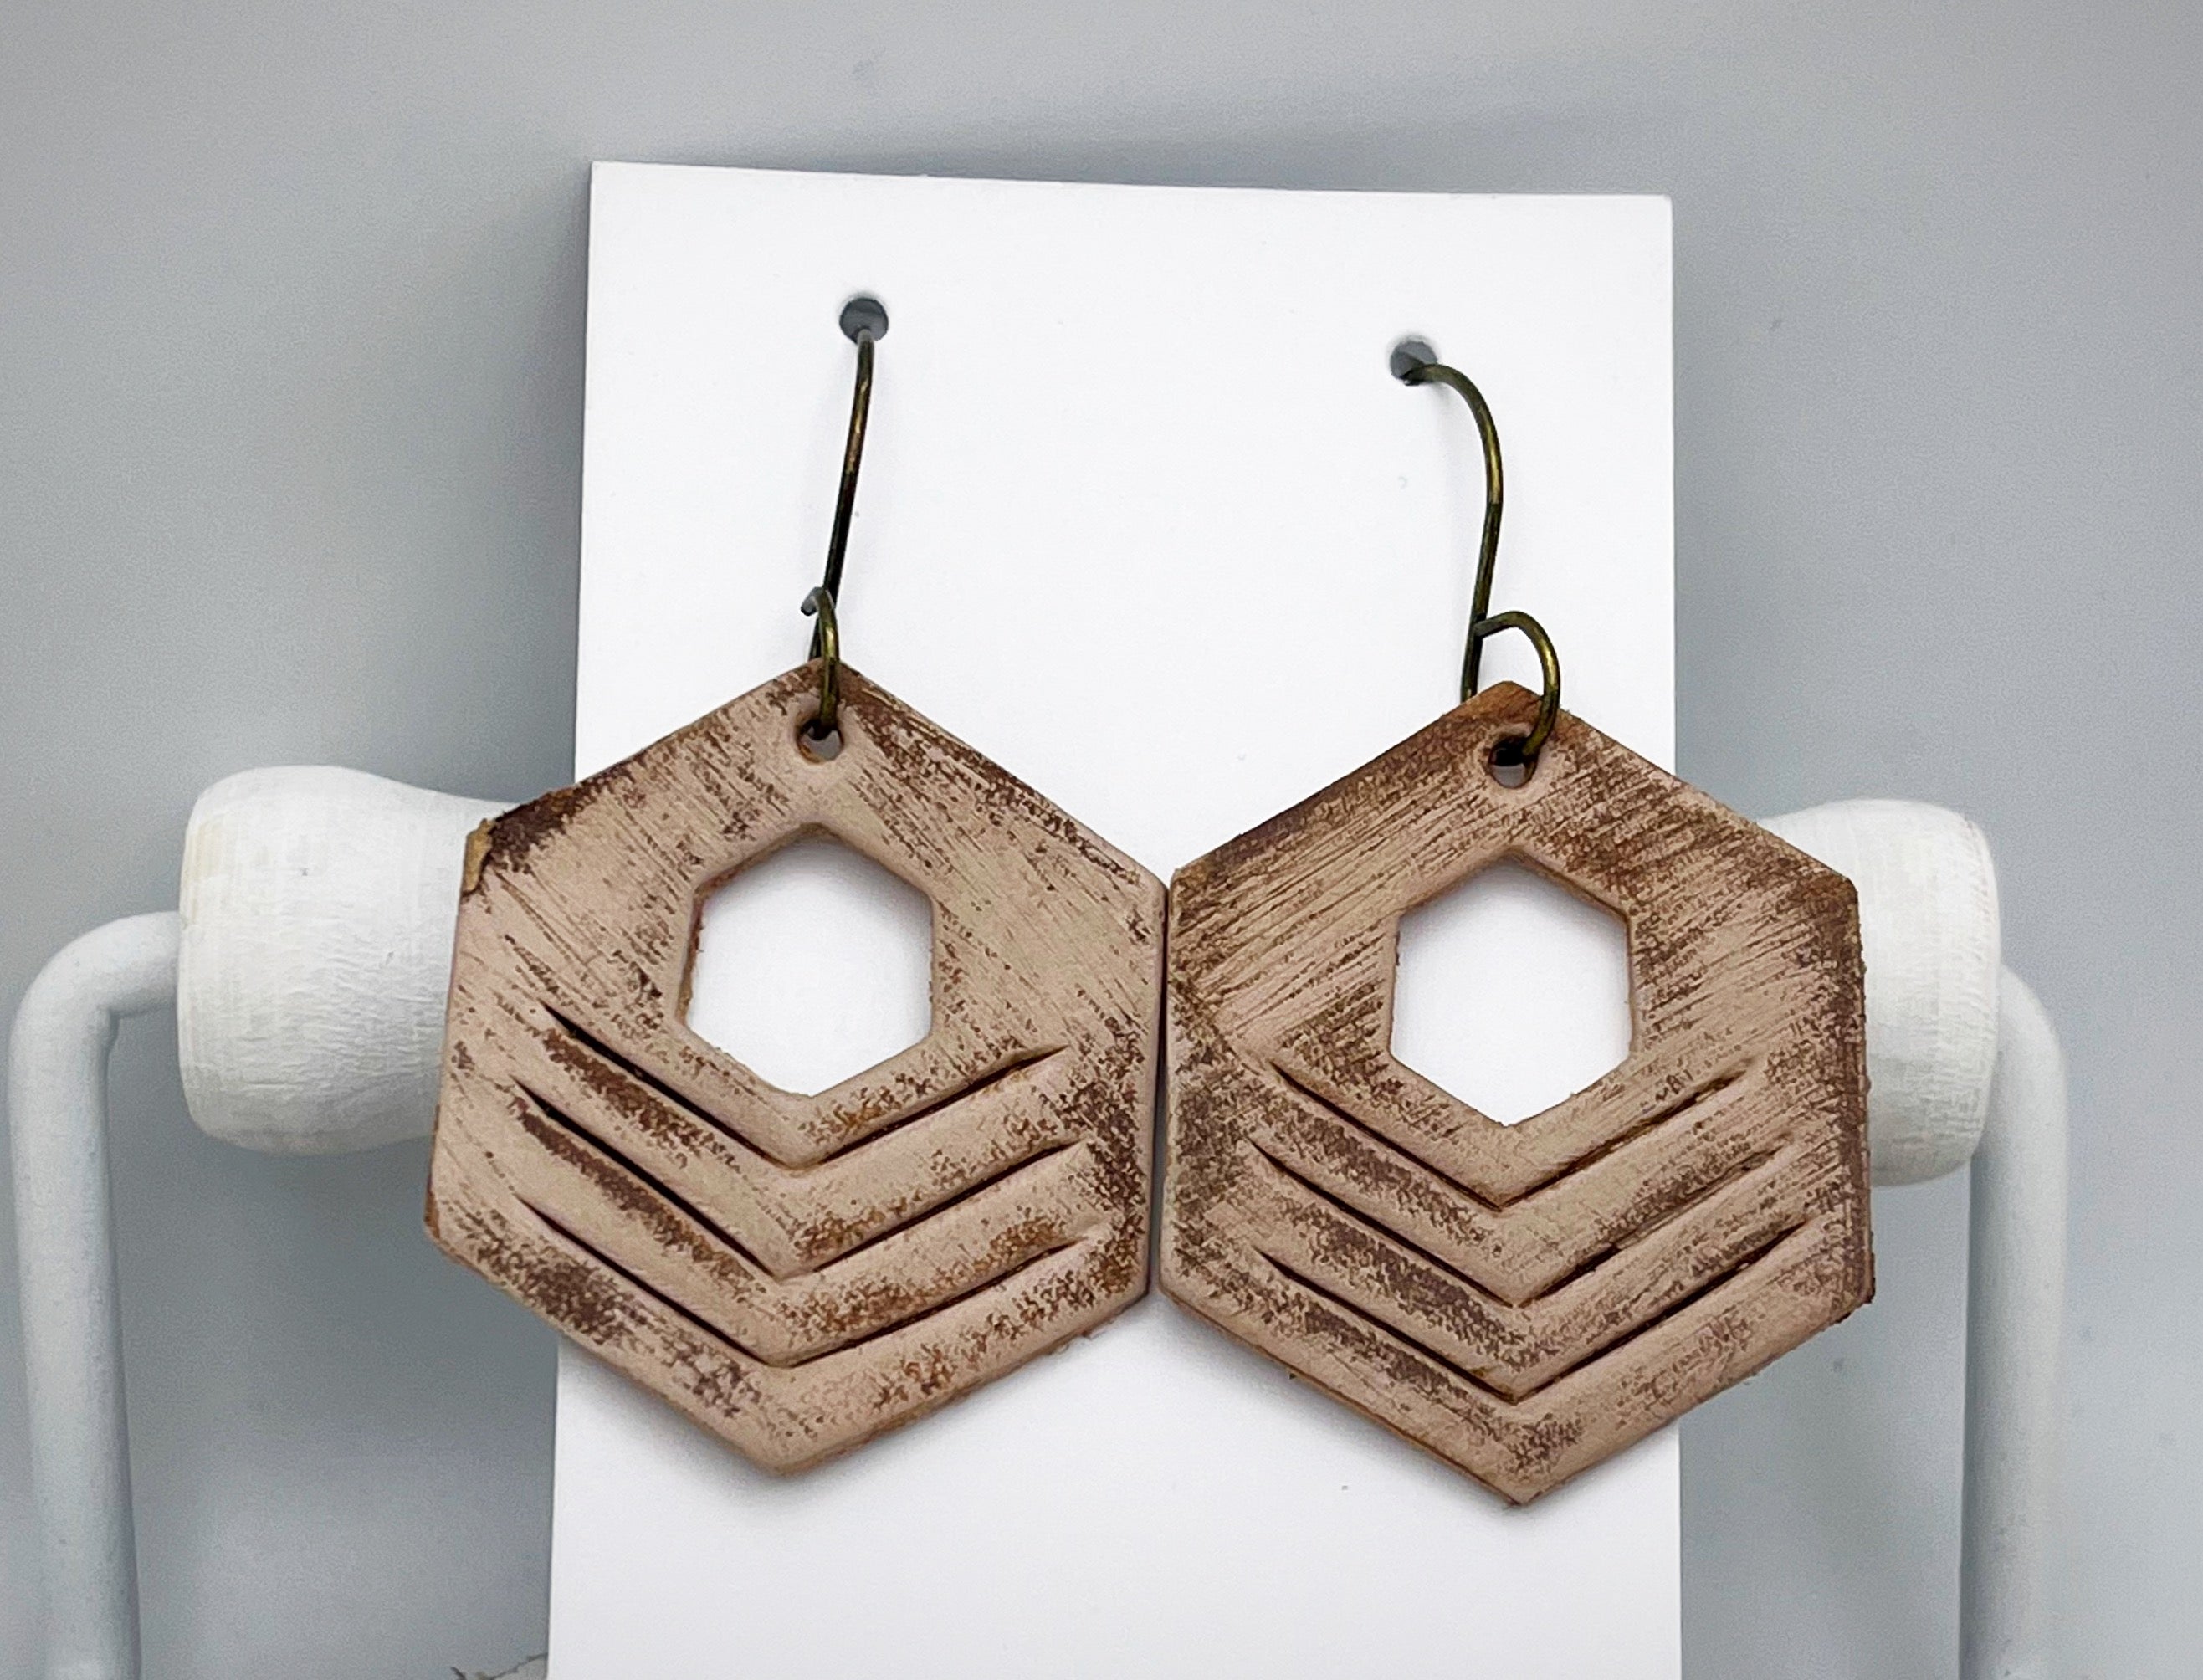 Tooled Leather Earrings - Isabell/ Cream/Brown Distressed